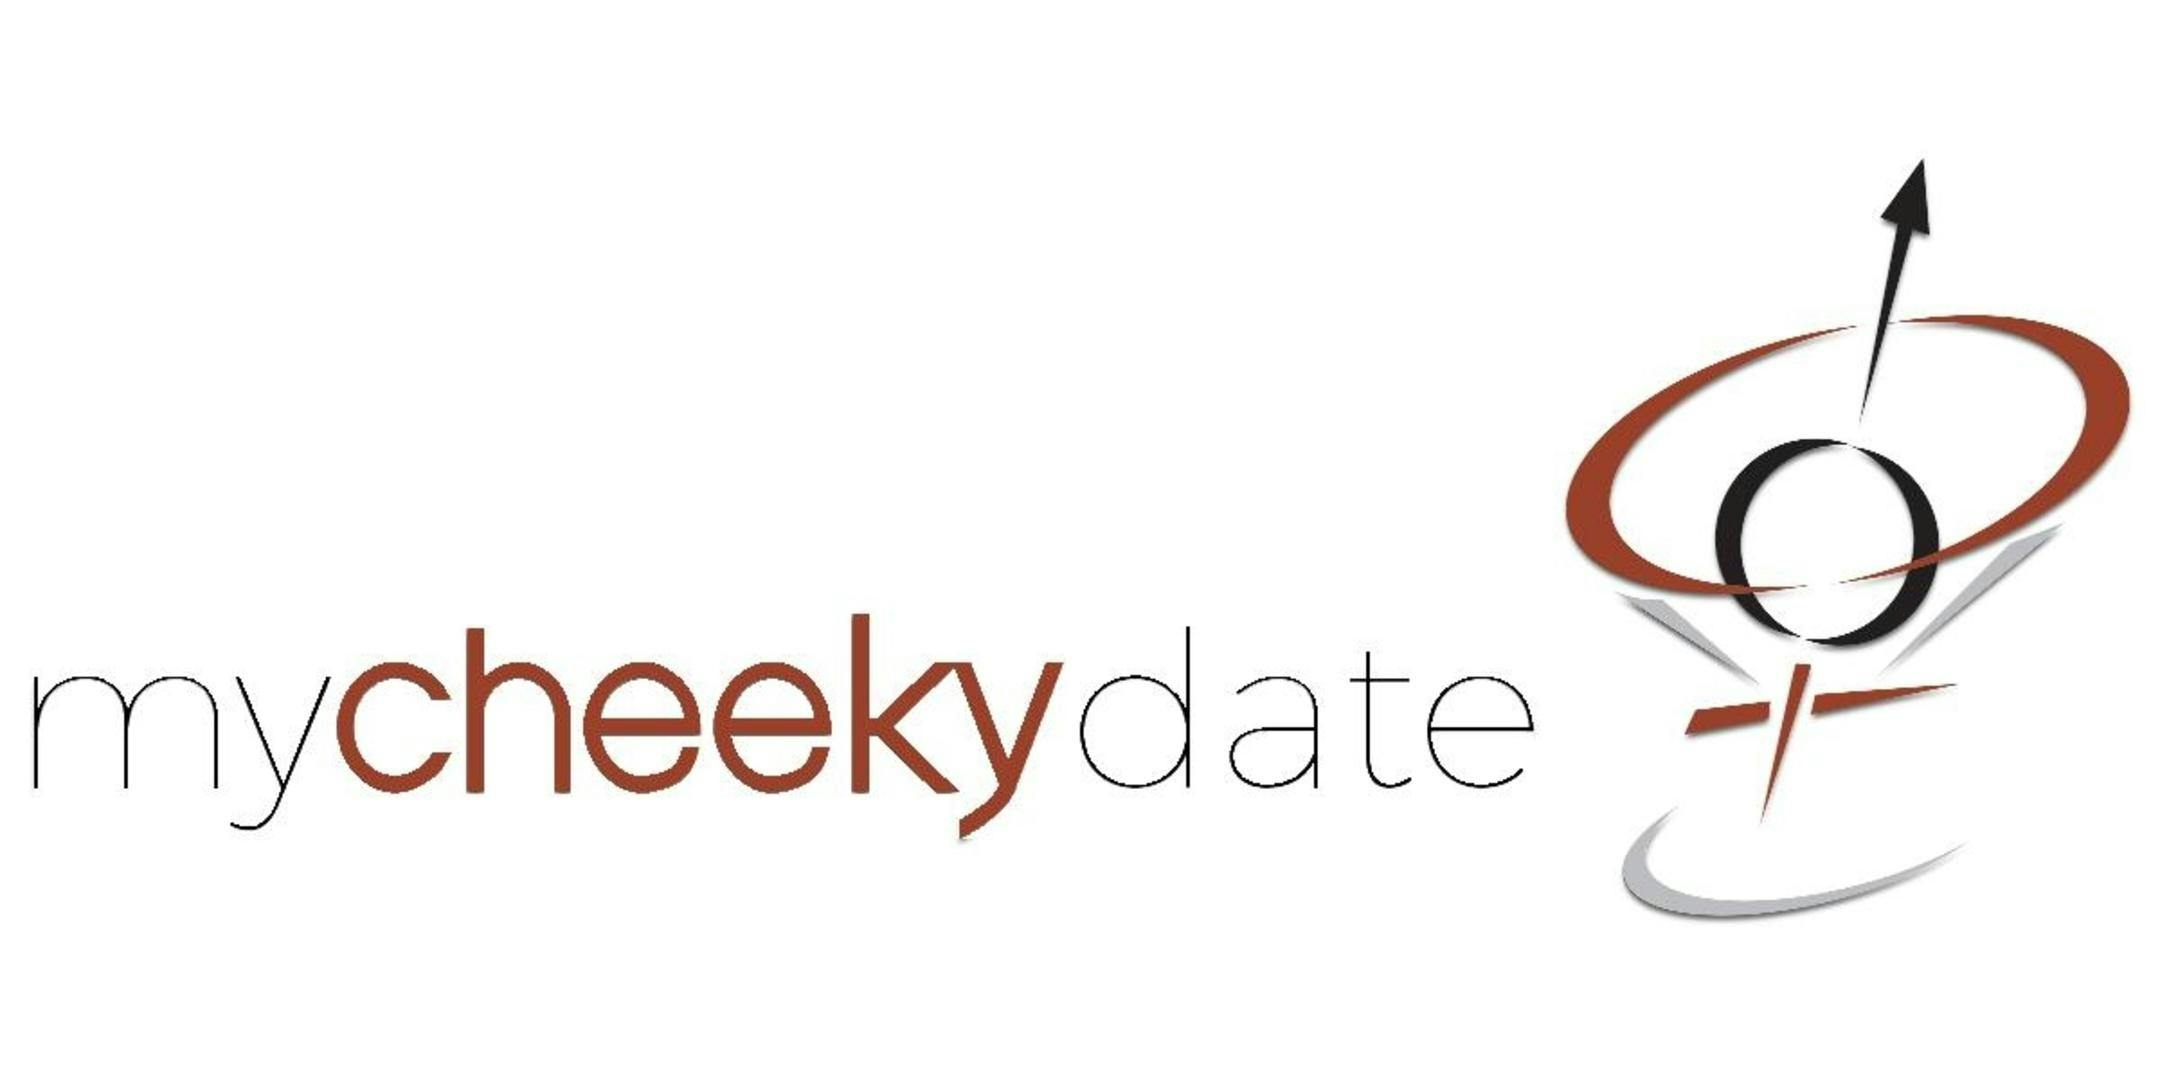 Singles Events | Speed Dating UK Style in Minneapolis (Ages 32-44) | Let's Get Cheeky!